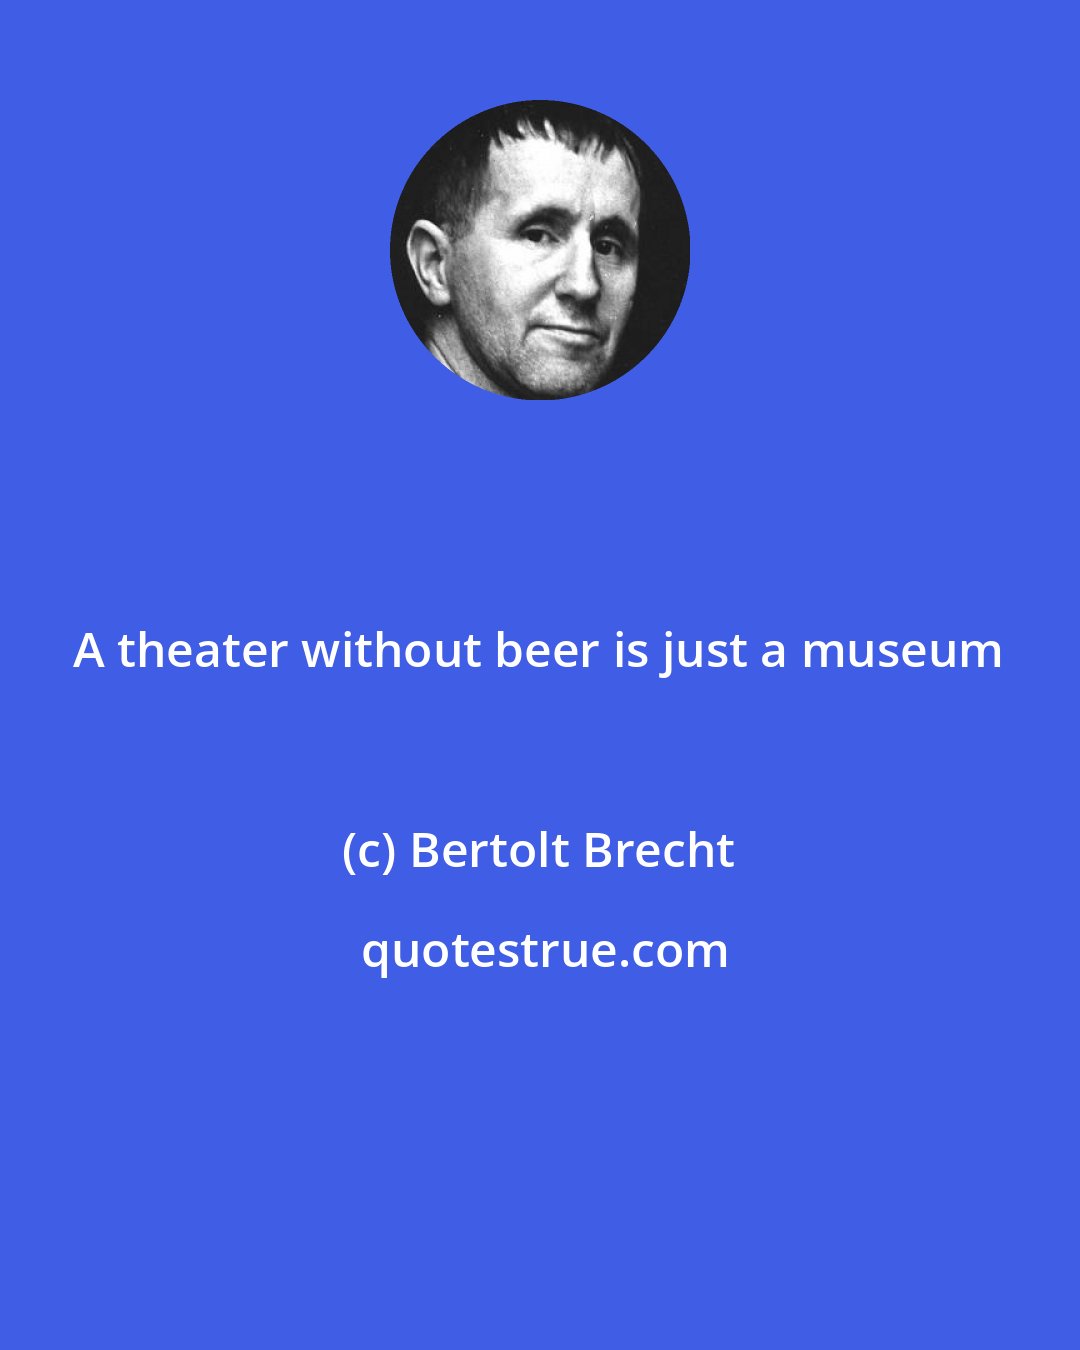 Bertolt Brecht: A theater without beer is just a museum